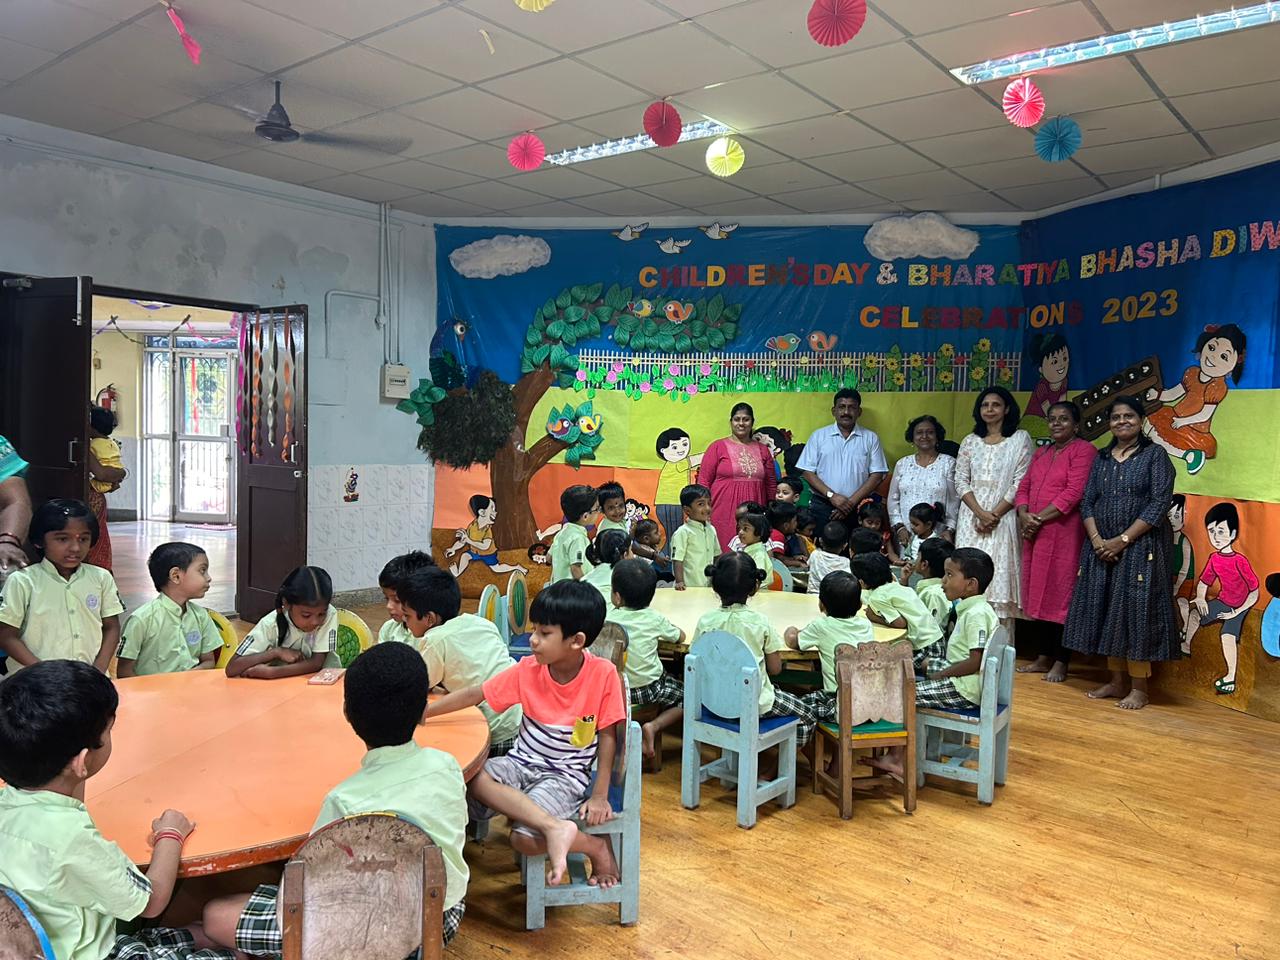 Dr. Sangeeta Gupta, (IRS) a bilingual poet, artist, writer and documentary filmmaker visited the Day Care Centre & Pre-Primary School on 11.12.2023 and interacted with the kids.